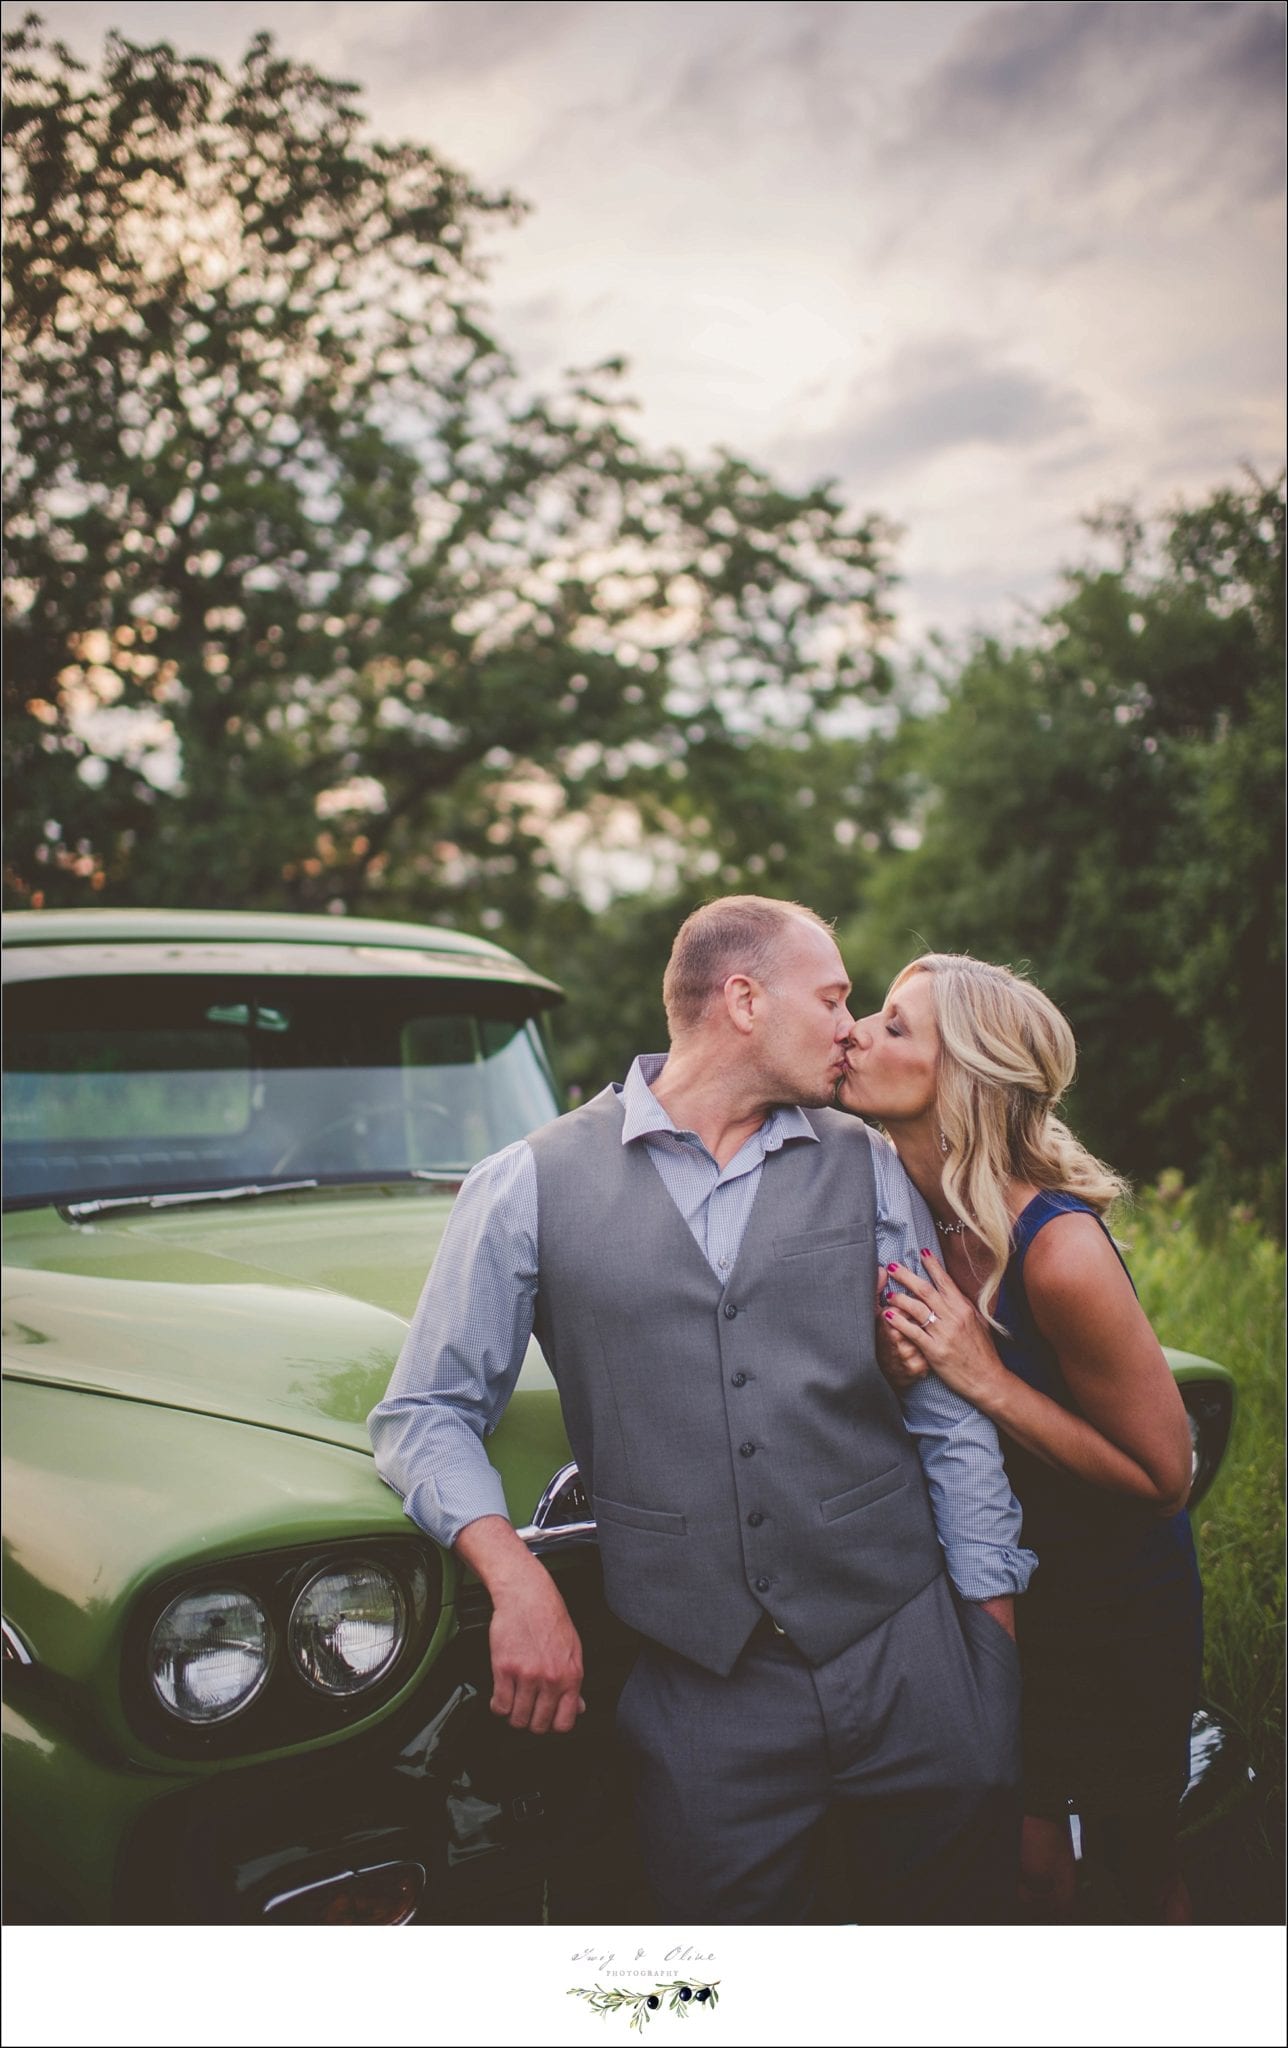 happy couple, engagement sessions, green truck, rustic, vintage, Rustic Manor, Dellafield WI, engagement sessions, well I'll be a son of a, happy couple, great couple, best wishes